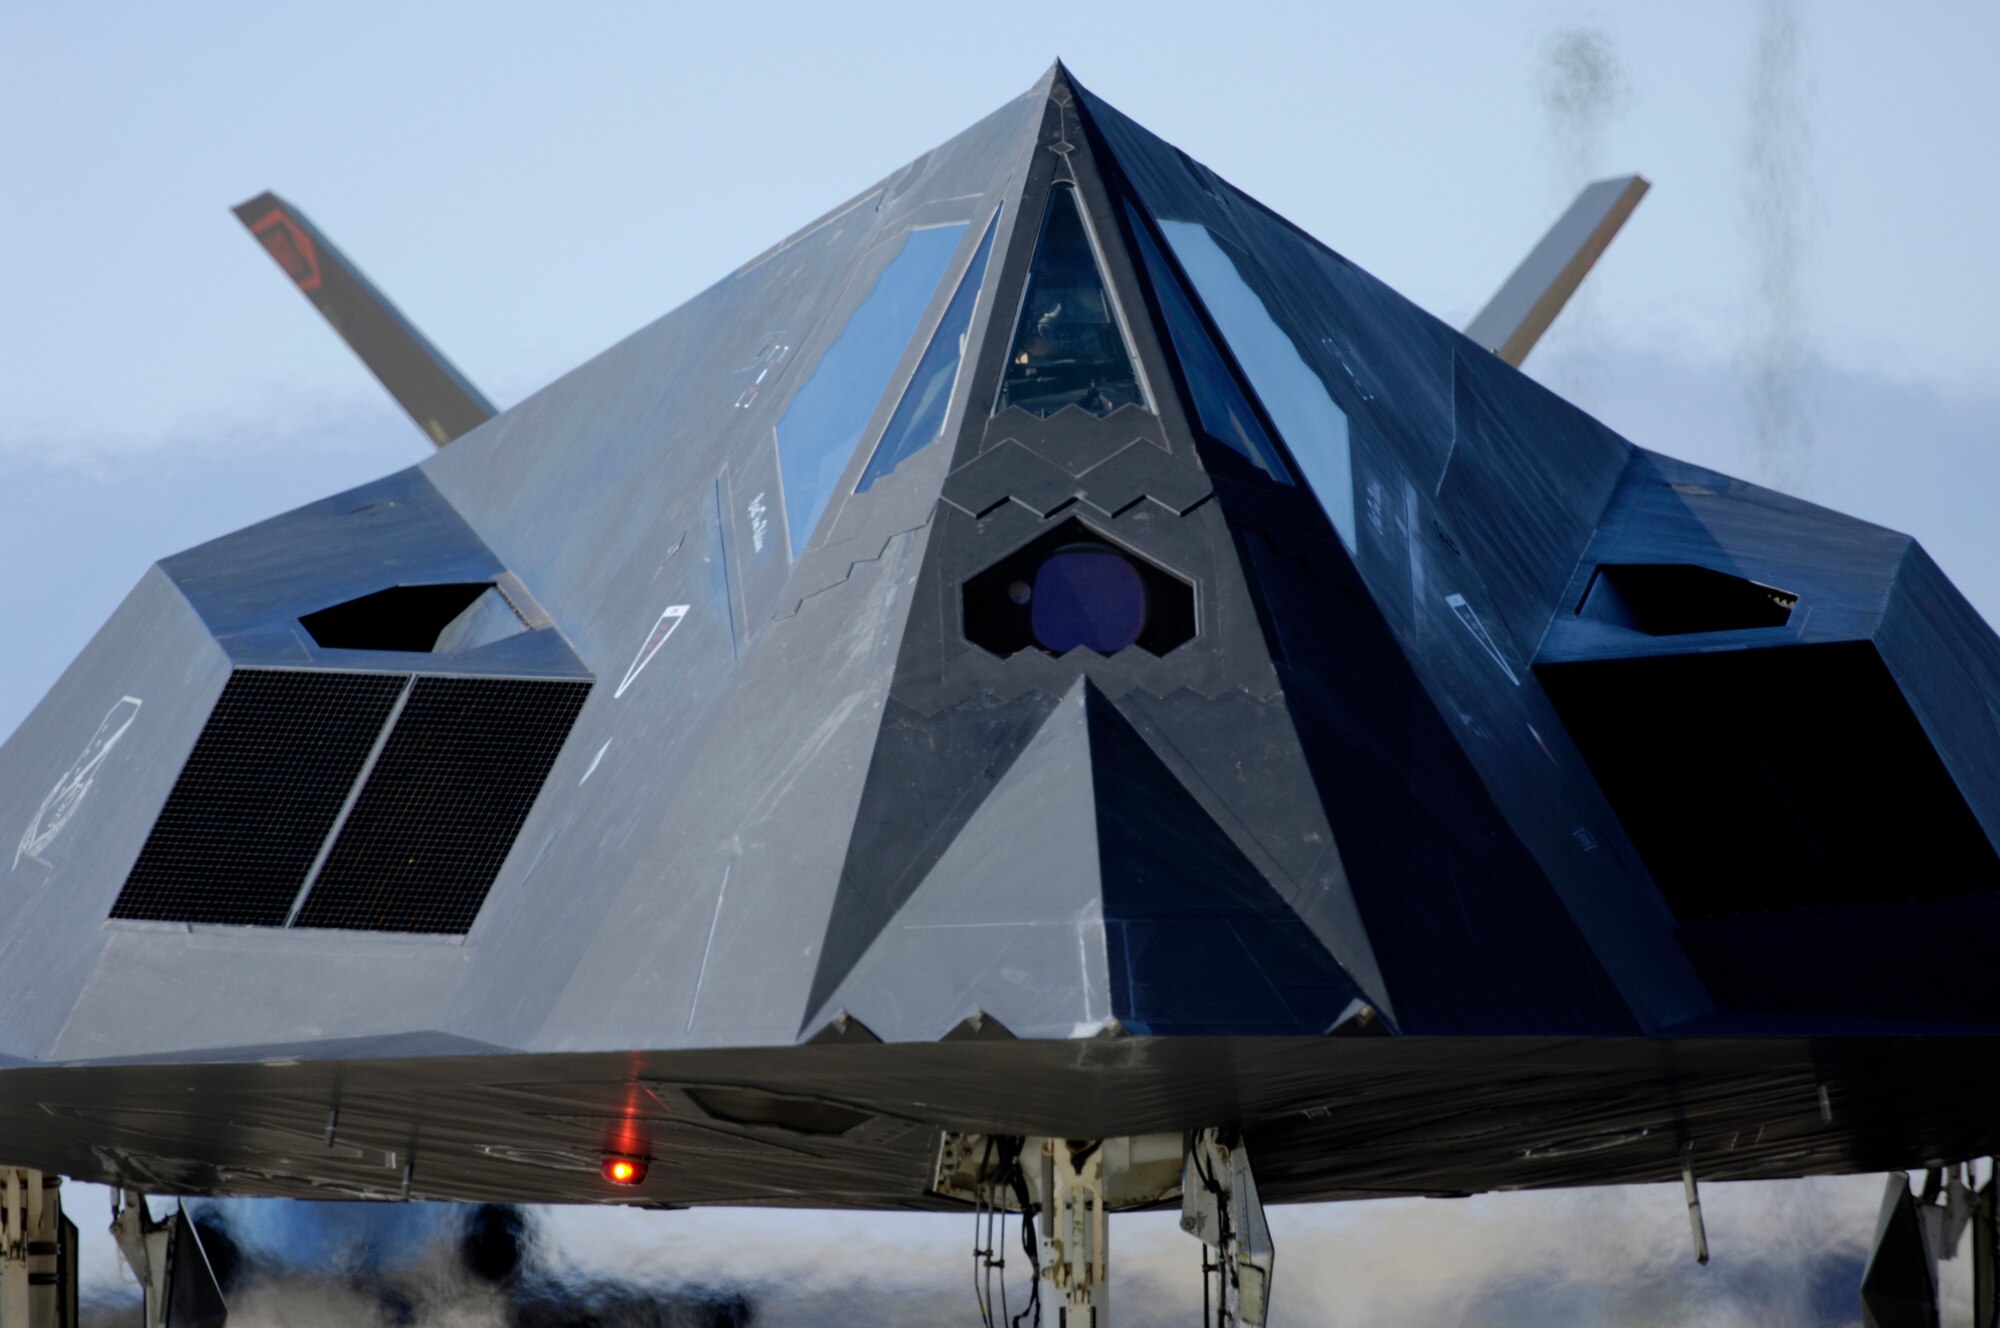 An F-117 Nighthawk taxies down the runway before its flight during the Holloman Air and Space Expo on 27 October 2007. The Holloman Air and Space Expo is a showcase of Air Force capabilities, the 49th Fighter Wing mission and the X Prize Foundation (U.S. Air Force Photo by Staff Sgt Jason Colbert)